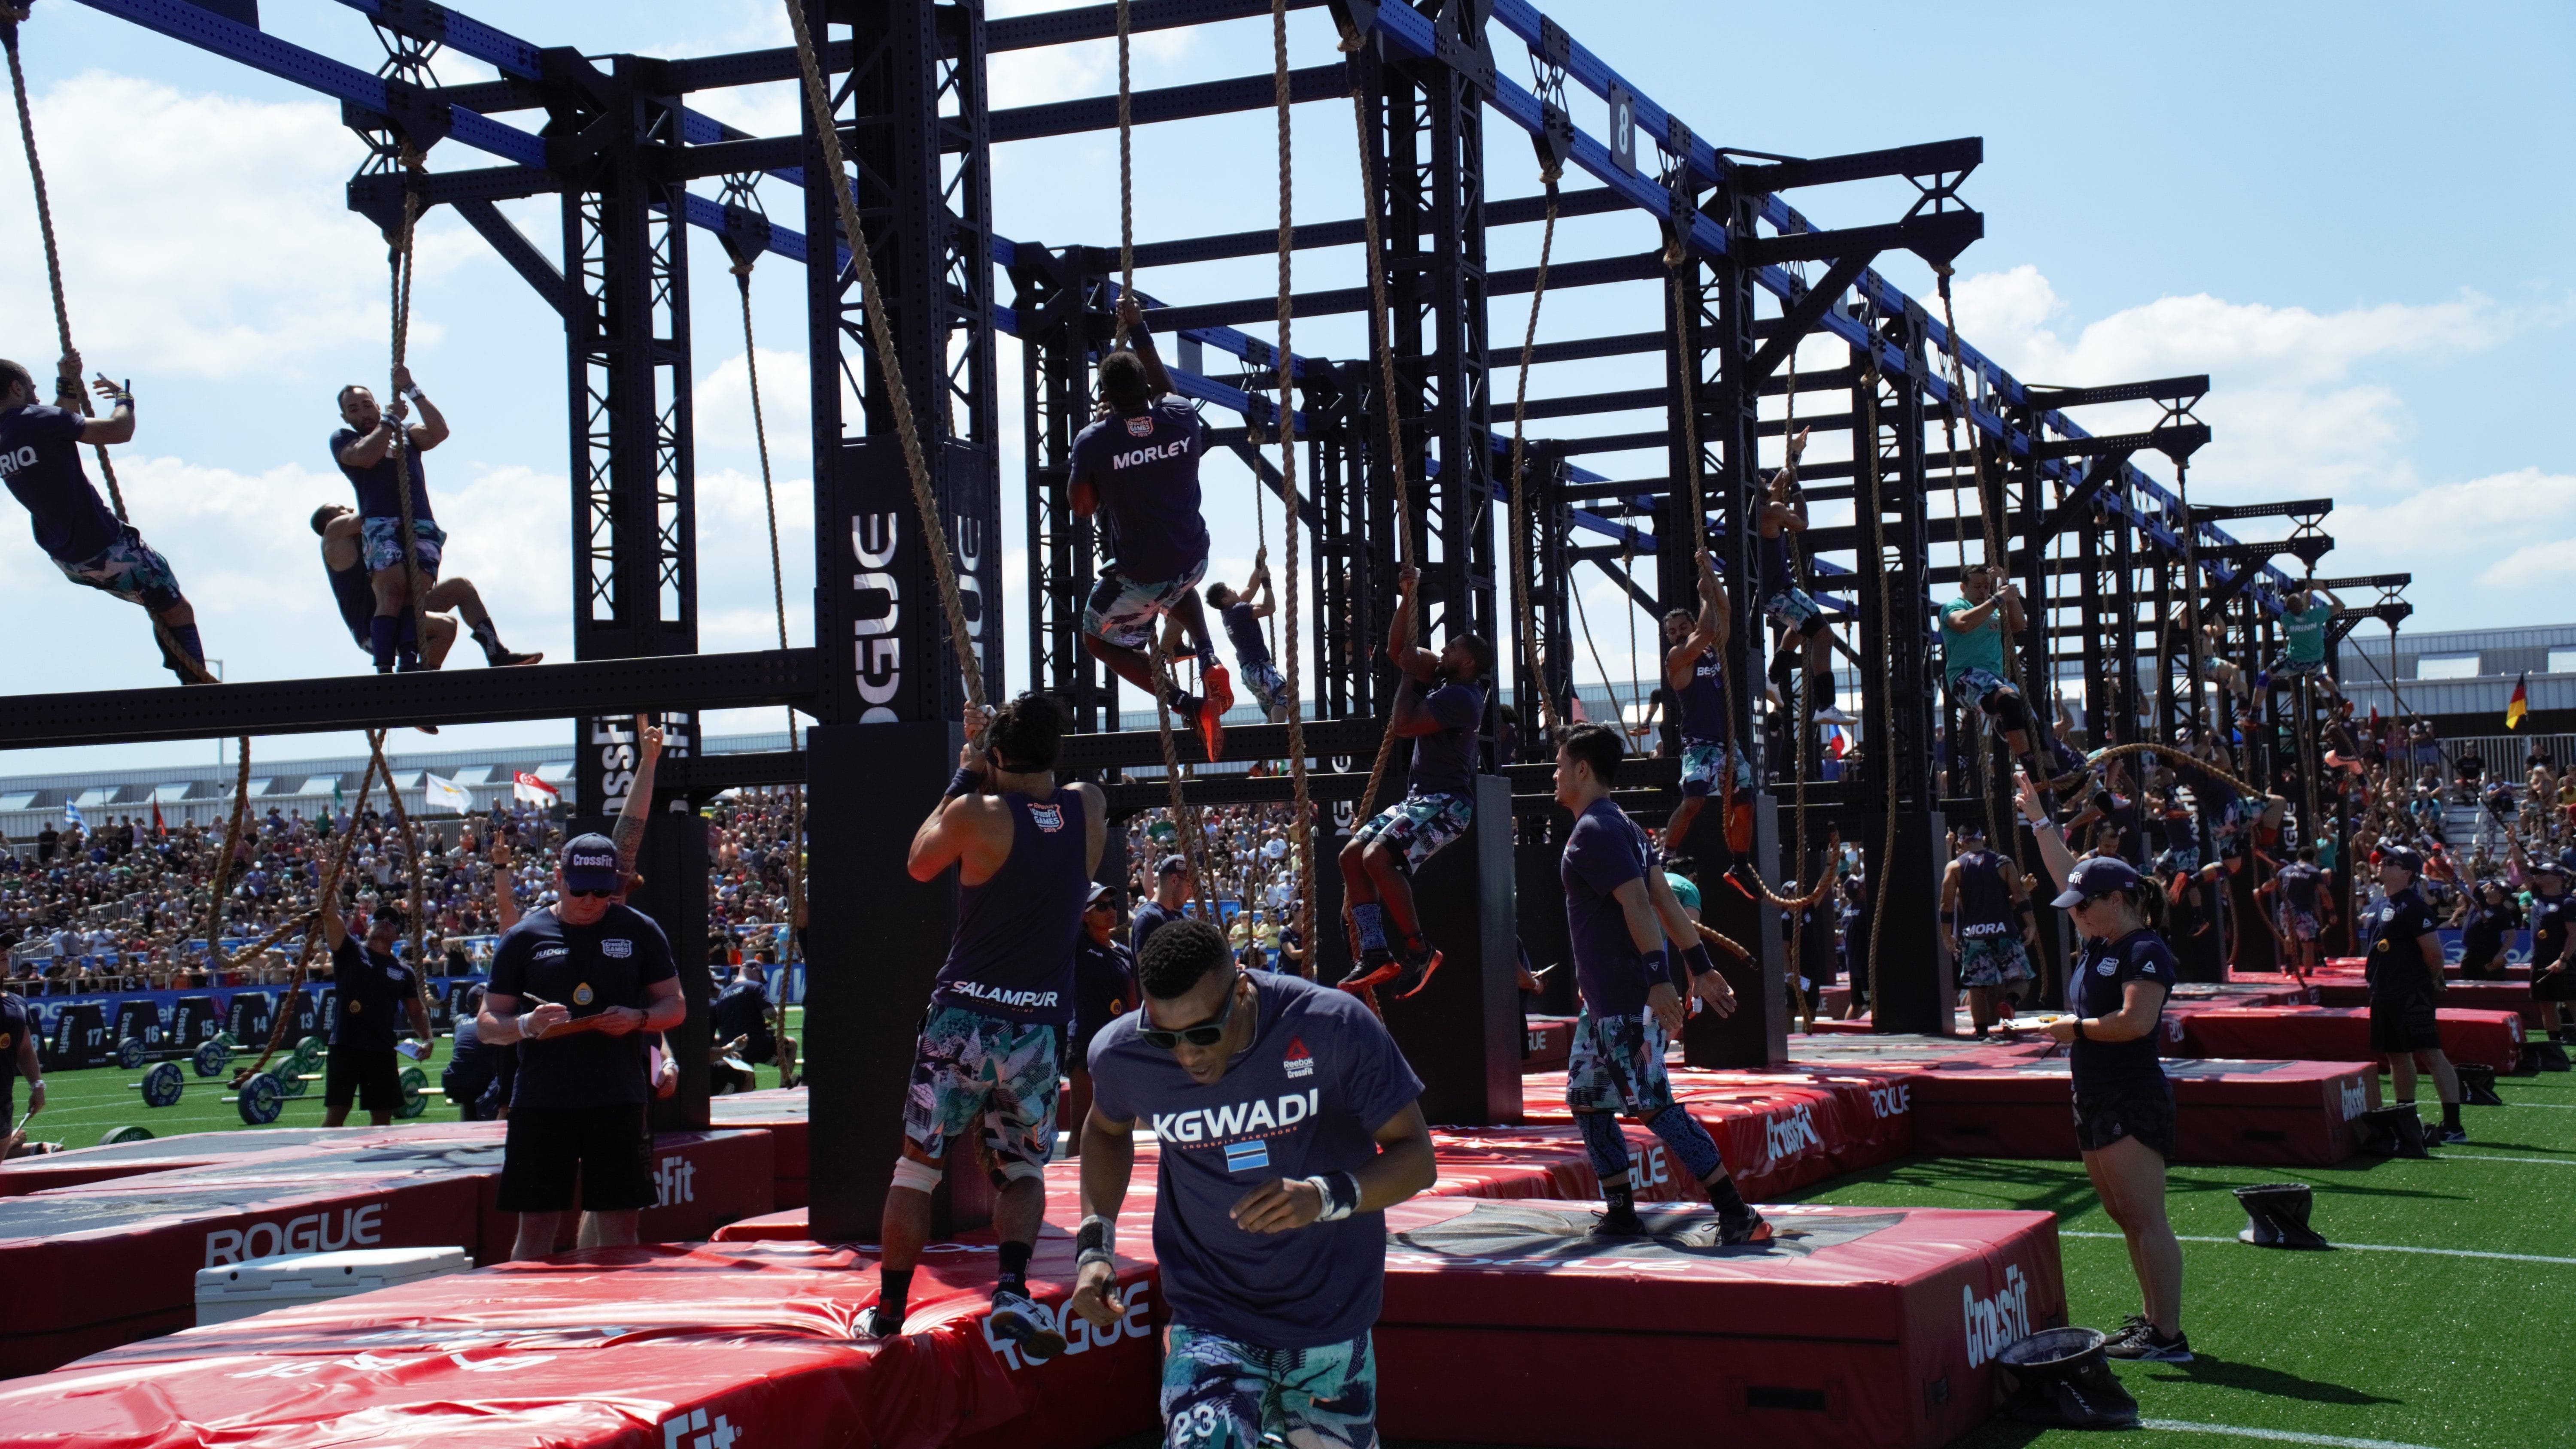 2020 crossfit games first cut